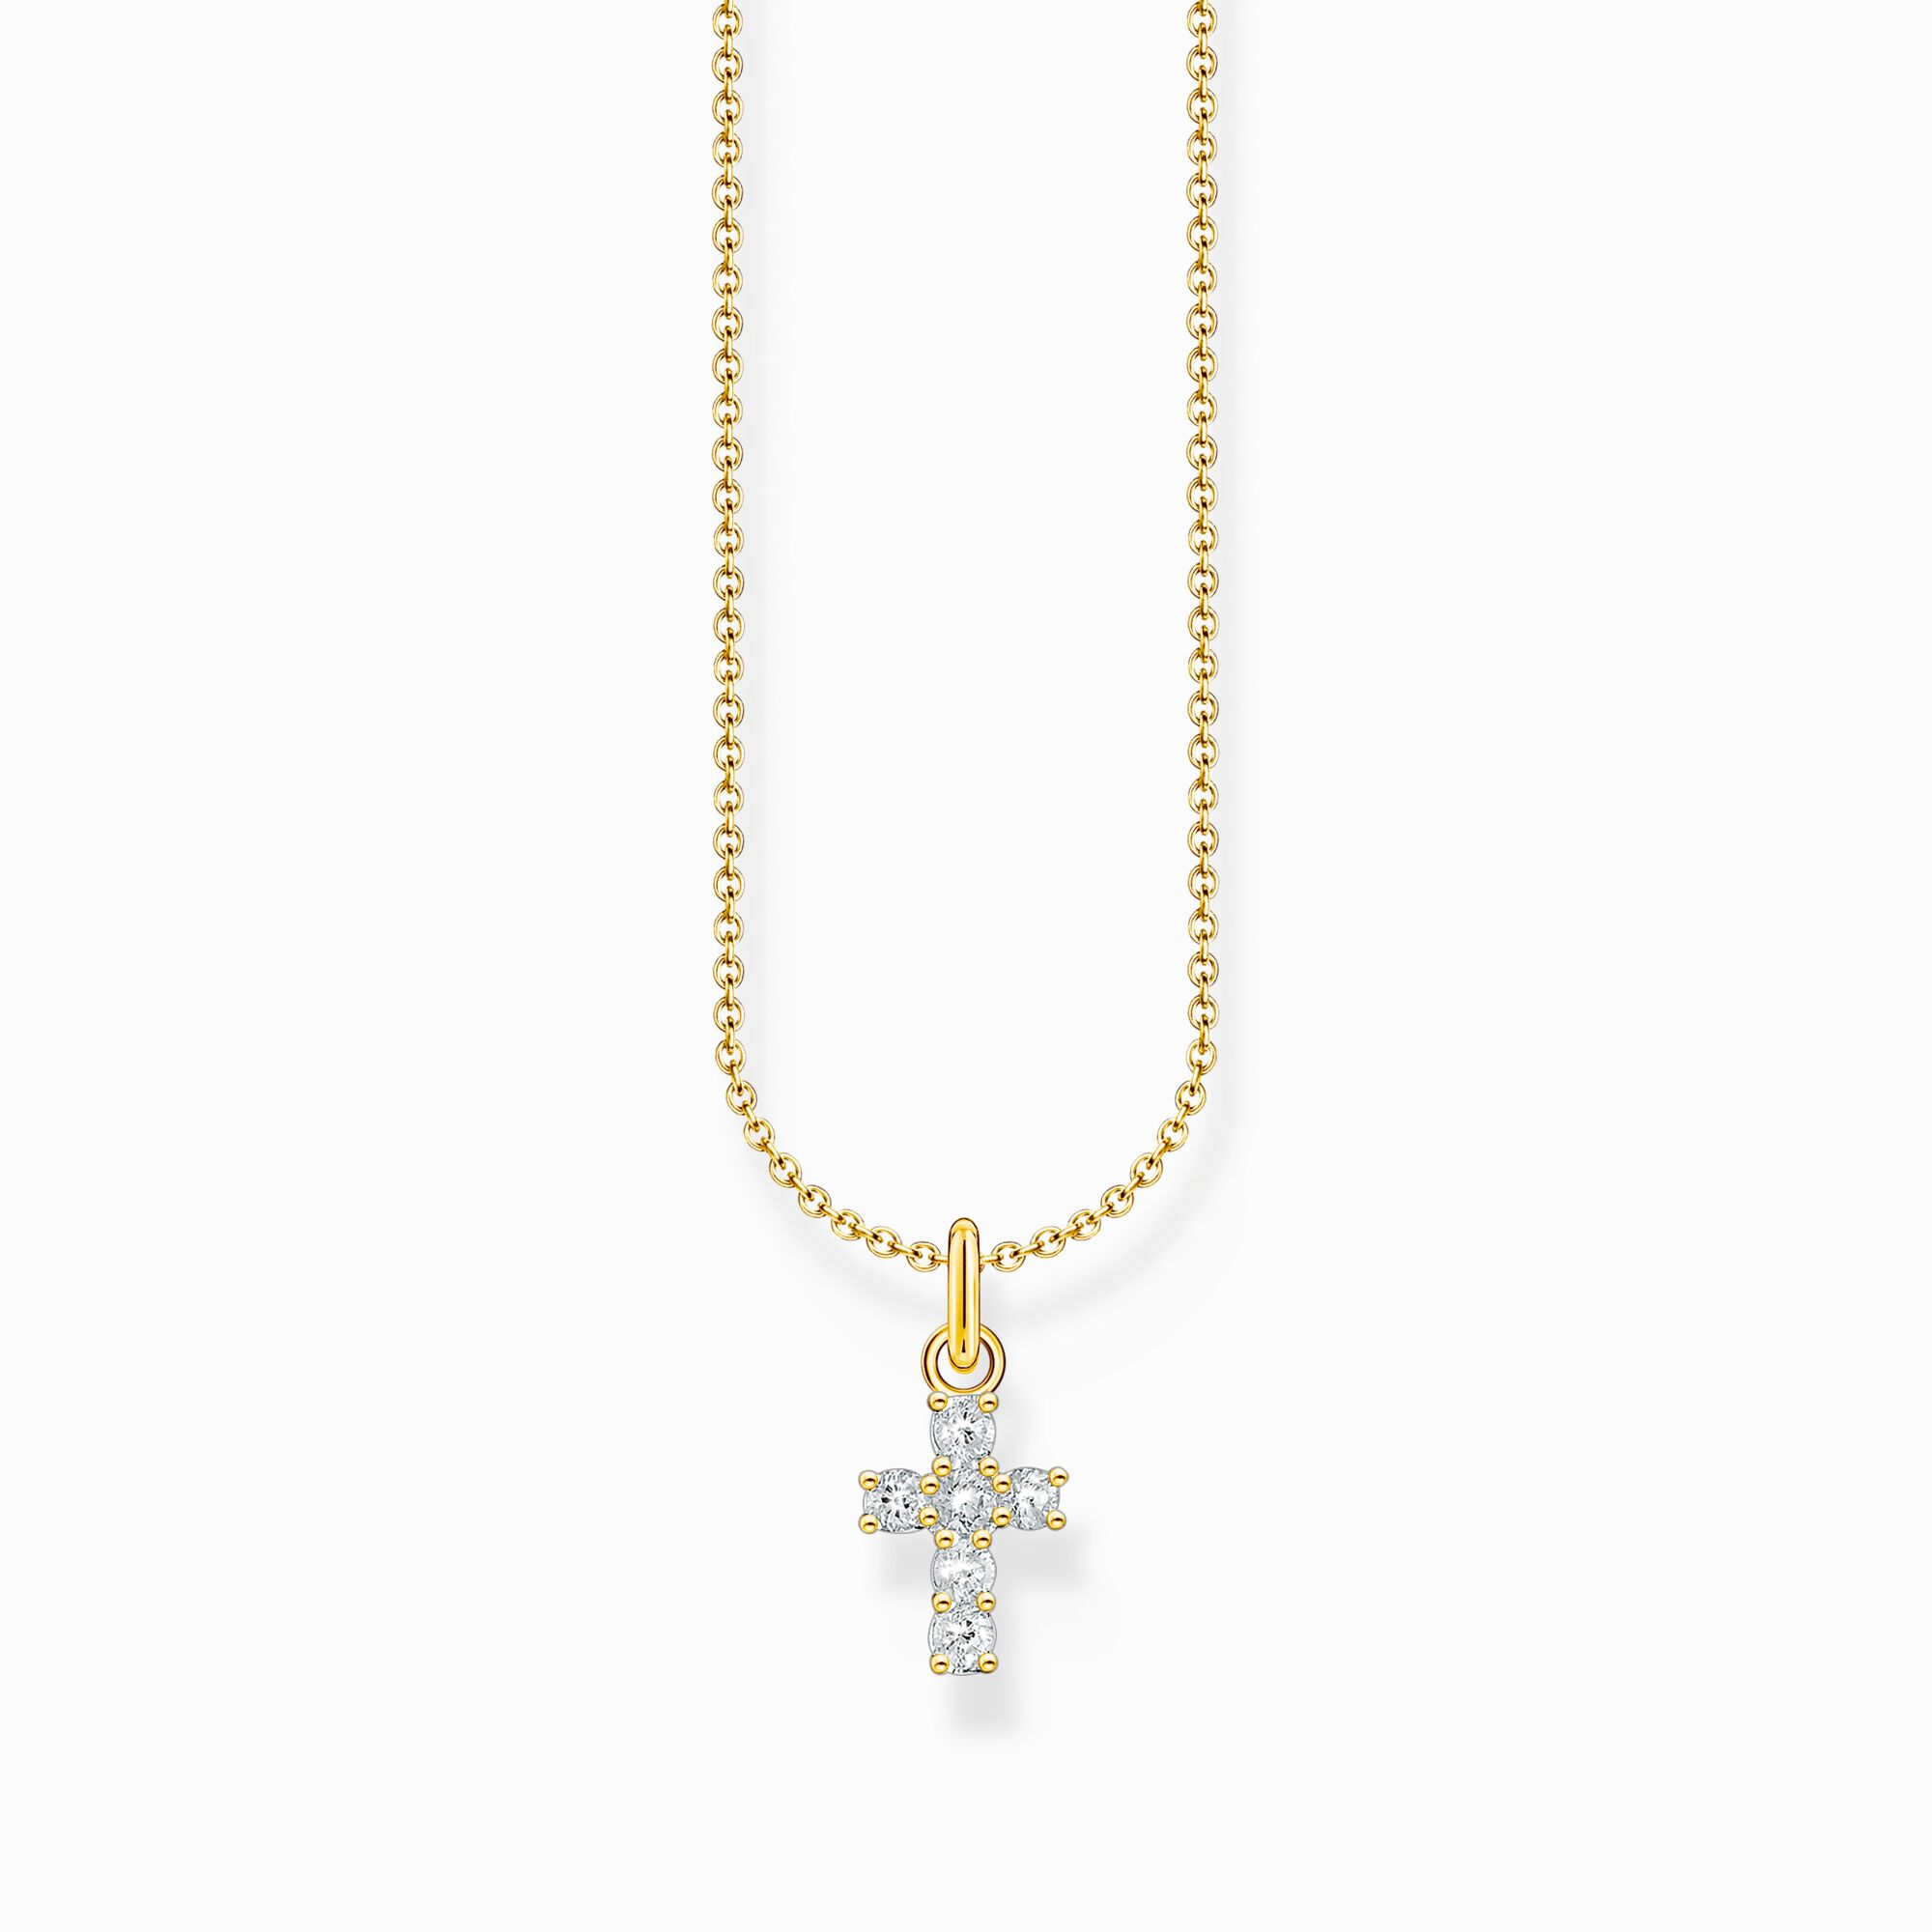 Gold-plated necklace with cross pendant with white zirconia from the Charming Collection collection in the THOMAS SABO online store